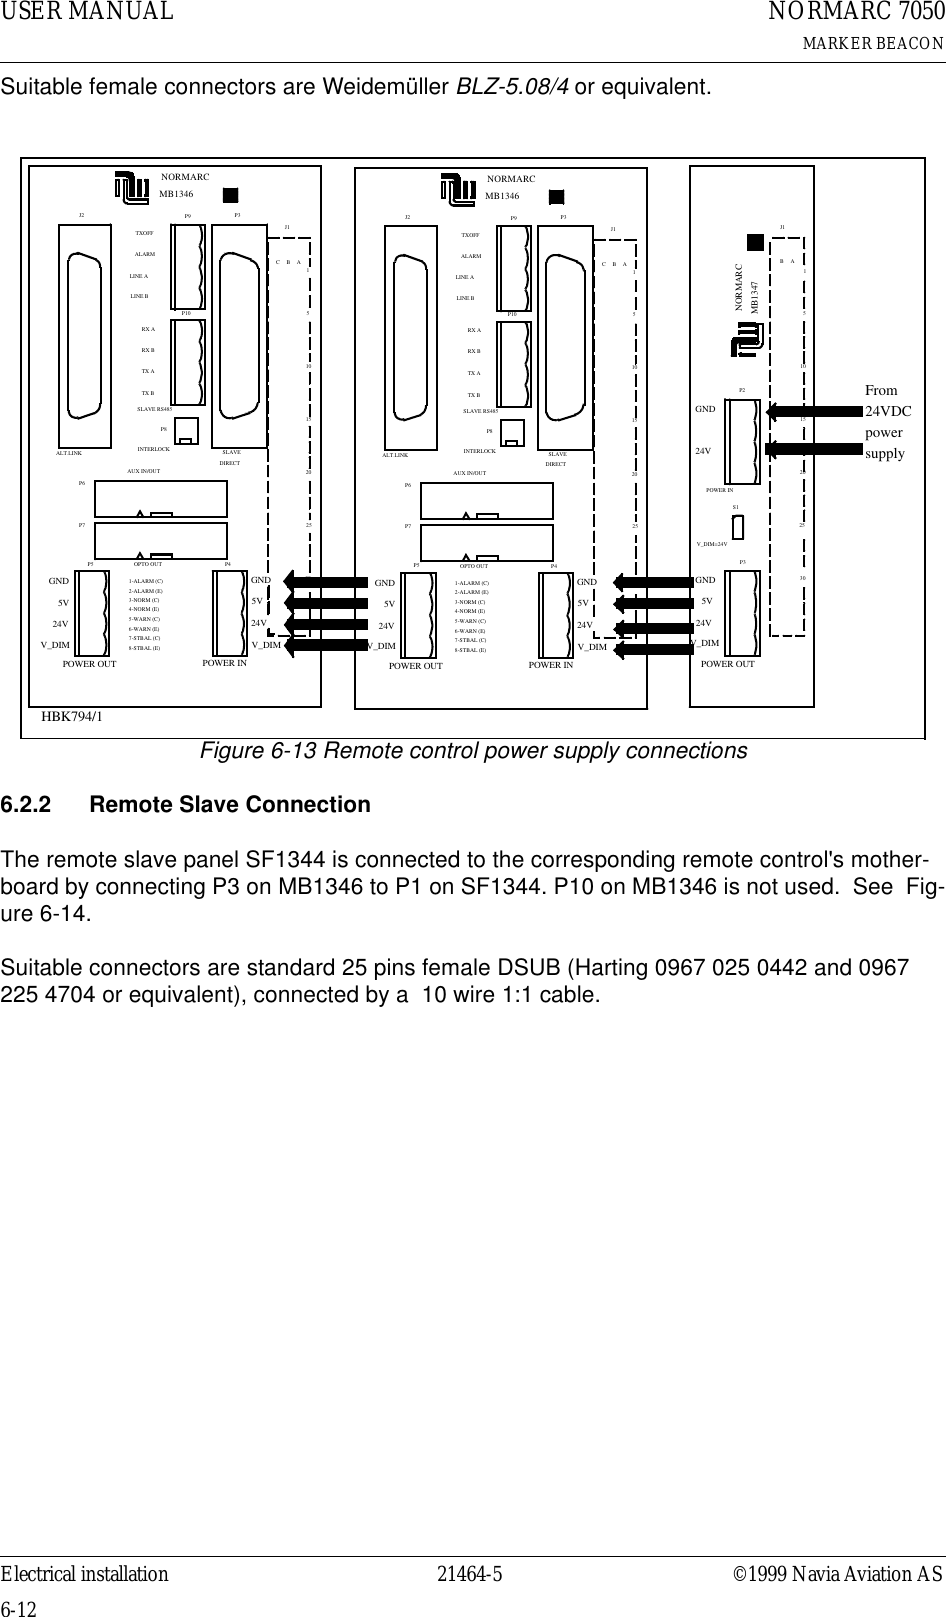 USER MANUAL6-1221464-5NORMARC 7050MARKER BEACONElectrical installation ©1999 Navia Aviation ASSuitable female connectors are Weidemüller BLZ-5.08/4 or equivalent.Figure 6-13 Remote control power supply connections6.2.2 Remote Slave ConnectionThe remote slave panel SF1344 is connected to the corresponding remote control&apos;s mother-board by connecting P3 on MB1346 to P1 on SF1344. P10 on MB1346 is not used.  See  Fig-ure 6-14.Suitable connectors are standard 25 pins female DSUB (Harting 0967 025 0442 and 0967 225 4704 or equivalent), connected by a  10 wire 1:1 cable.J2 P3P6P7P4P5P9P10P8NORMARCOPTO OUT2-ALARM (E)1-ALARM (C)4-NORM (E)5-WARN (C)6-WARN (E)7-STBAL (C)8-STBAL (E)3-NORM (C)GND5V24VV_DIMGND5V24VV_DIMPOWER OUT POWER INAUX IN/OUTSLAVEDIRECTINTERLOCKTXOFFALARMLINE ALINE BRX ARX BTX ATX BSLAVE RS485J1ABC153020251510ALT.LINKMB1346P2P3S1GND24VPOWER INGND5V24VV_DIMPOWER OUTV_DIM=24VMB1347NORMARC302520151051ABJ1J2 P3P6P7P4P5P9P10P8NORMARCOPTO OUT2-ALARM (E)1-ALARM (C)4-NORM (E)5-WARN (C)6-WARN (E)7-STBAL (C)8-STBAL (E)3-NORM (C)GND5V24VV_DIMGND5V24VV_DIMPOWER OUT POWER INAUX IN/OUTSLAVEDIRECTINTERLOCKTXOFFALARMLINE ALINE BRX ARX BTX ATX BSLAVE RS485J1ABC153020251510ALT.LINKMB1346From 24VDCpowersupplyHBK794/1